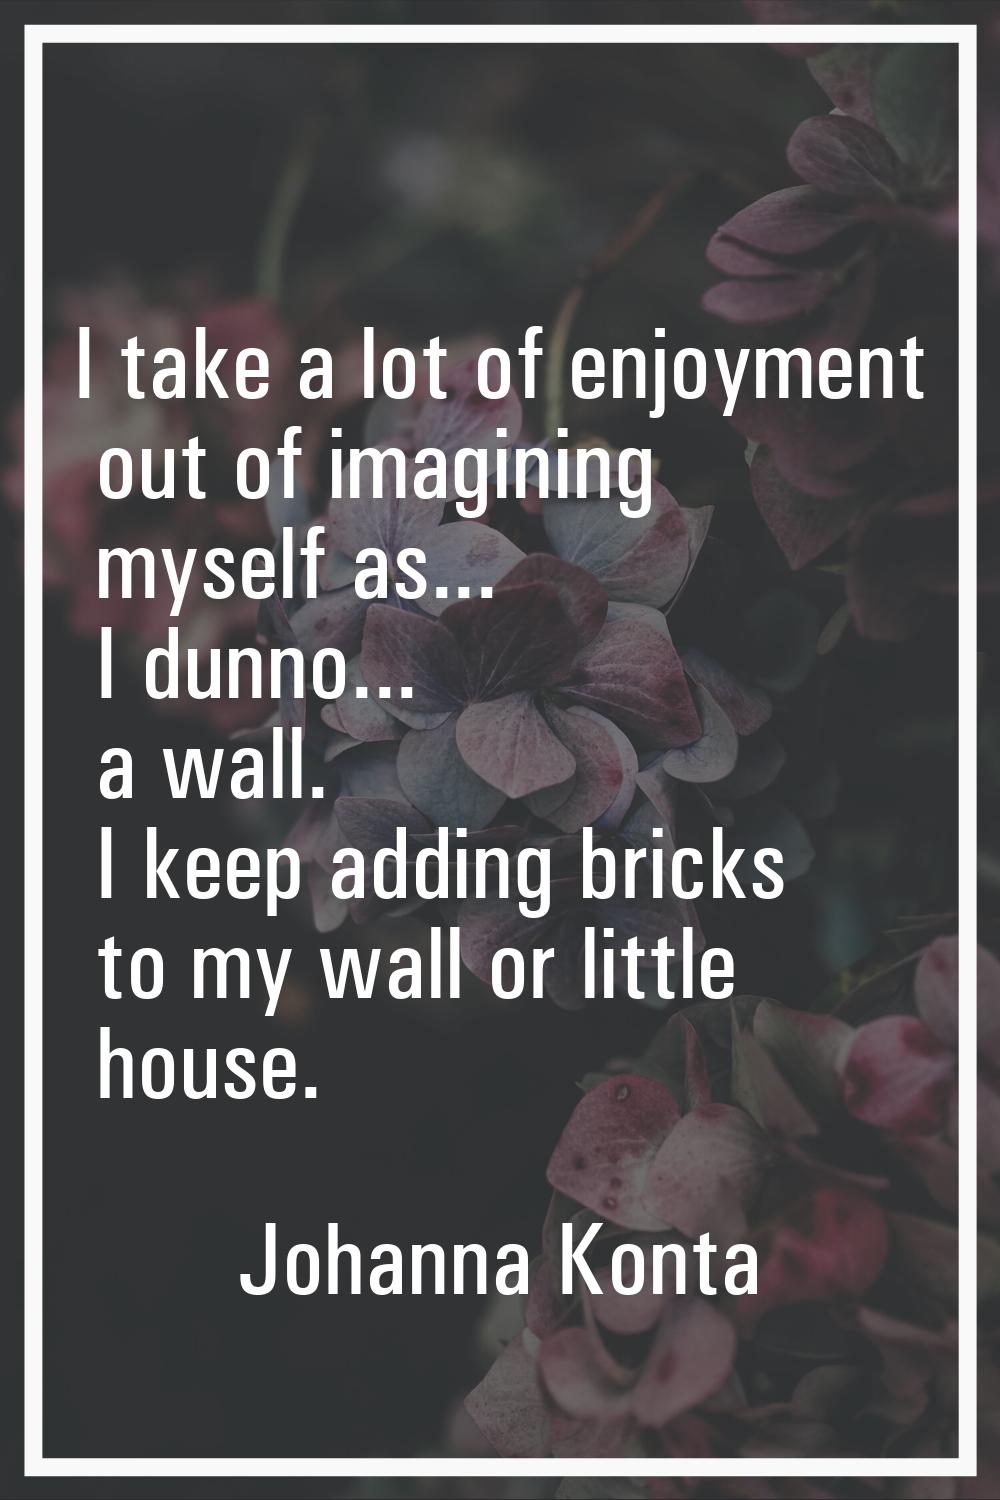 I take a lot of enjoyment out of imagining myself as... I dunno... a wall. I keep adding bricks to 